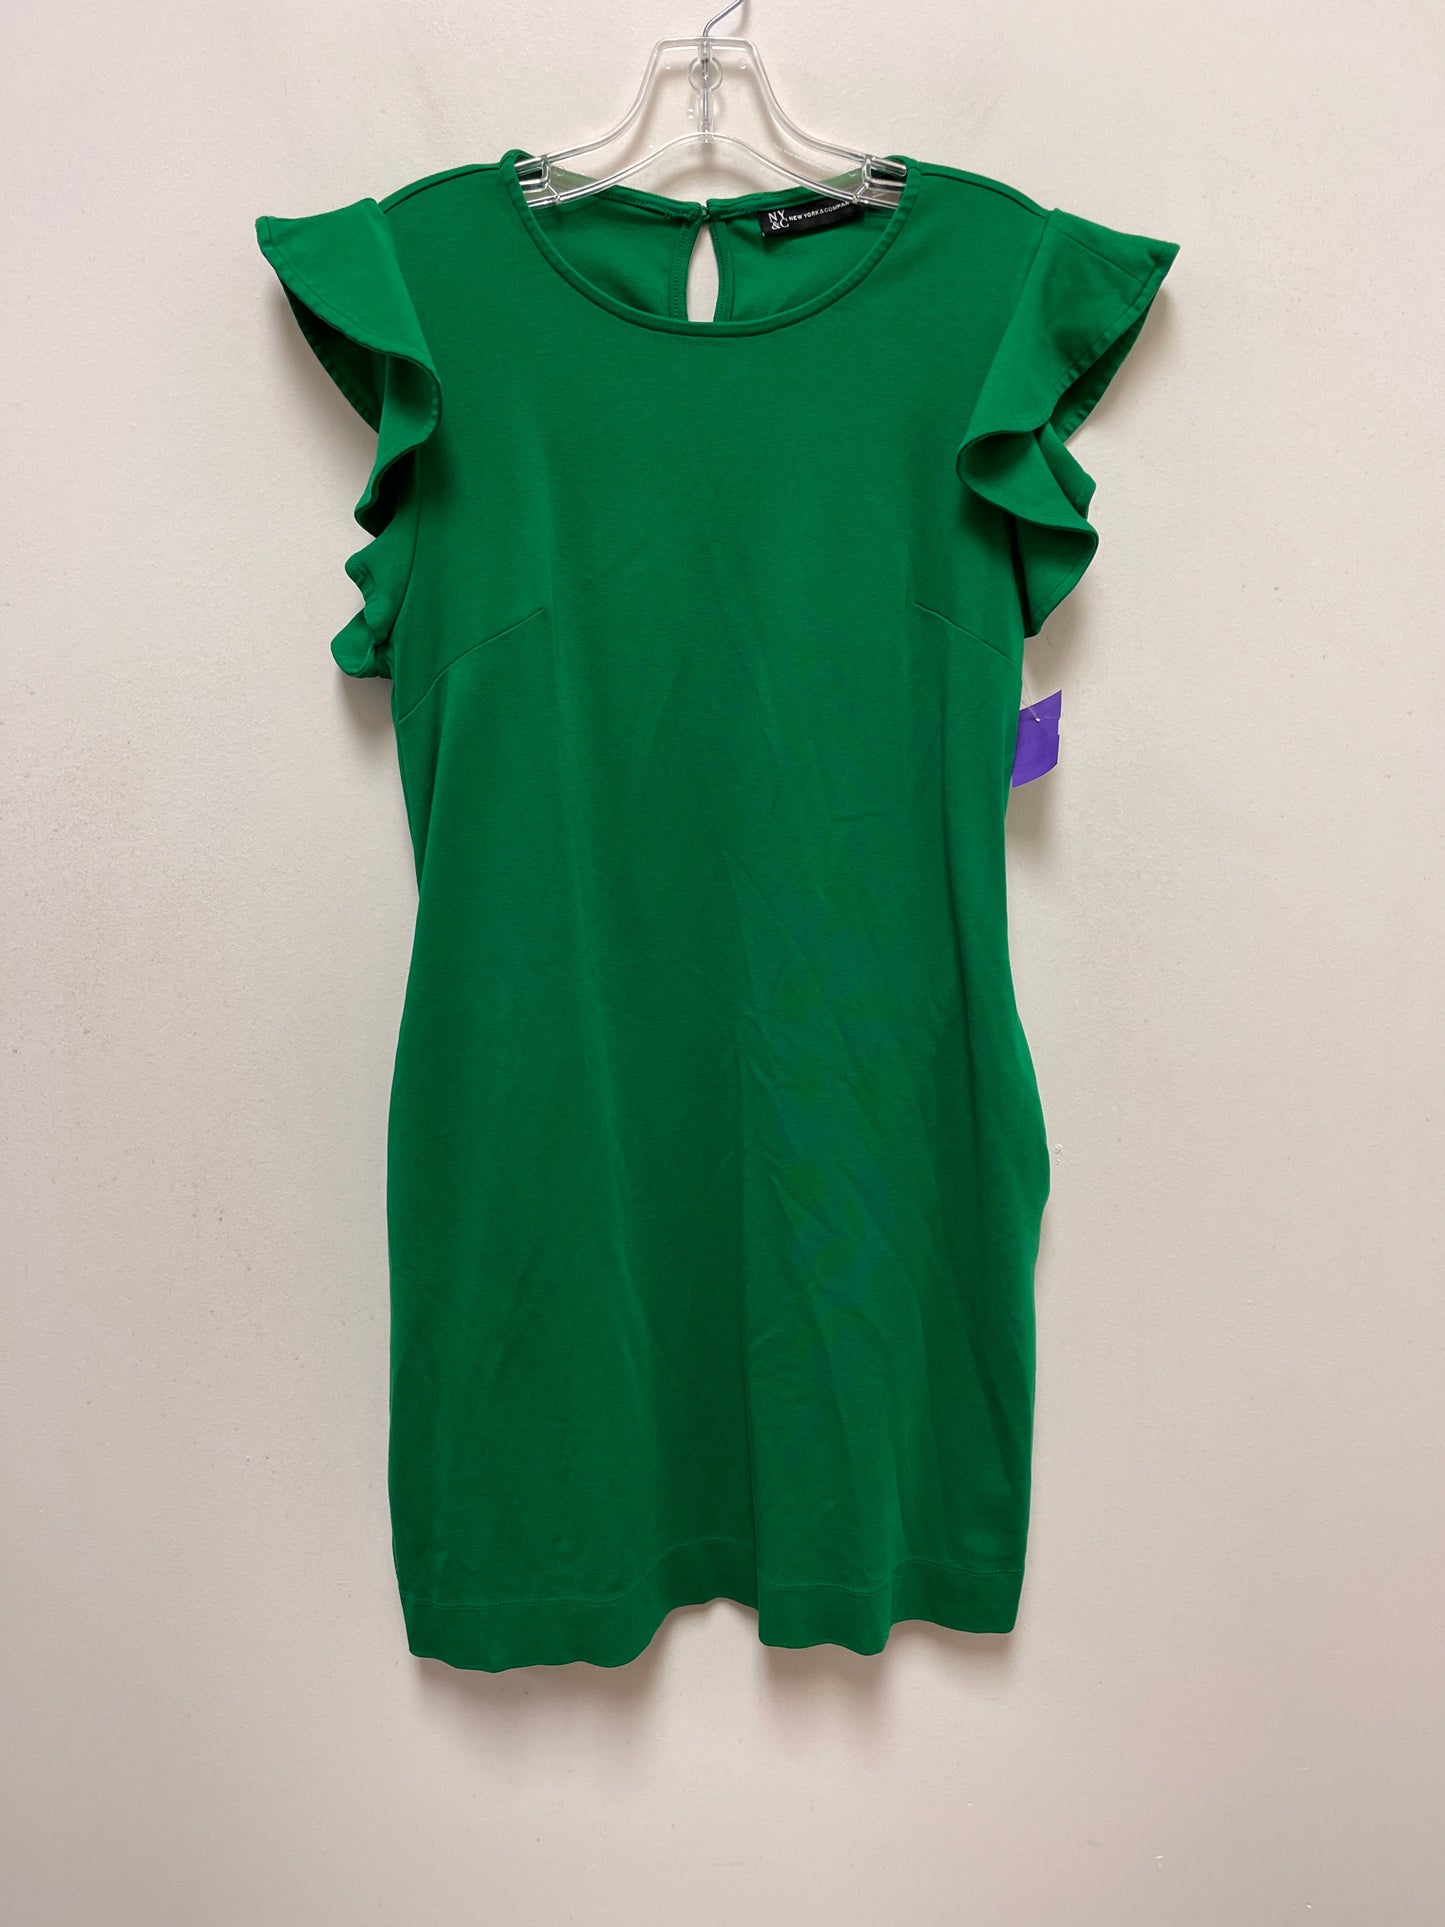 Green Dress Casual Midi New York And Co, Size M